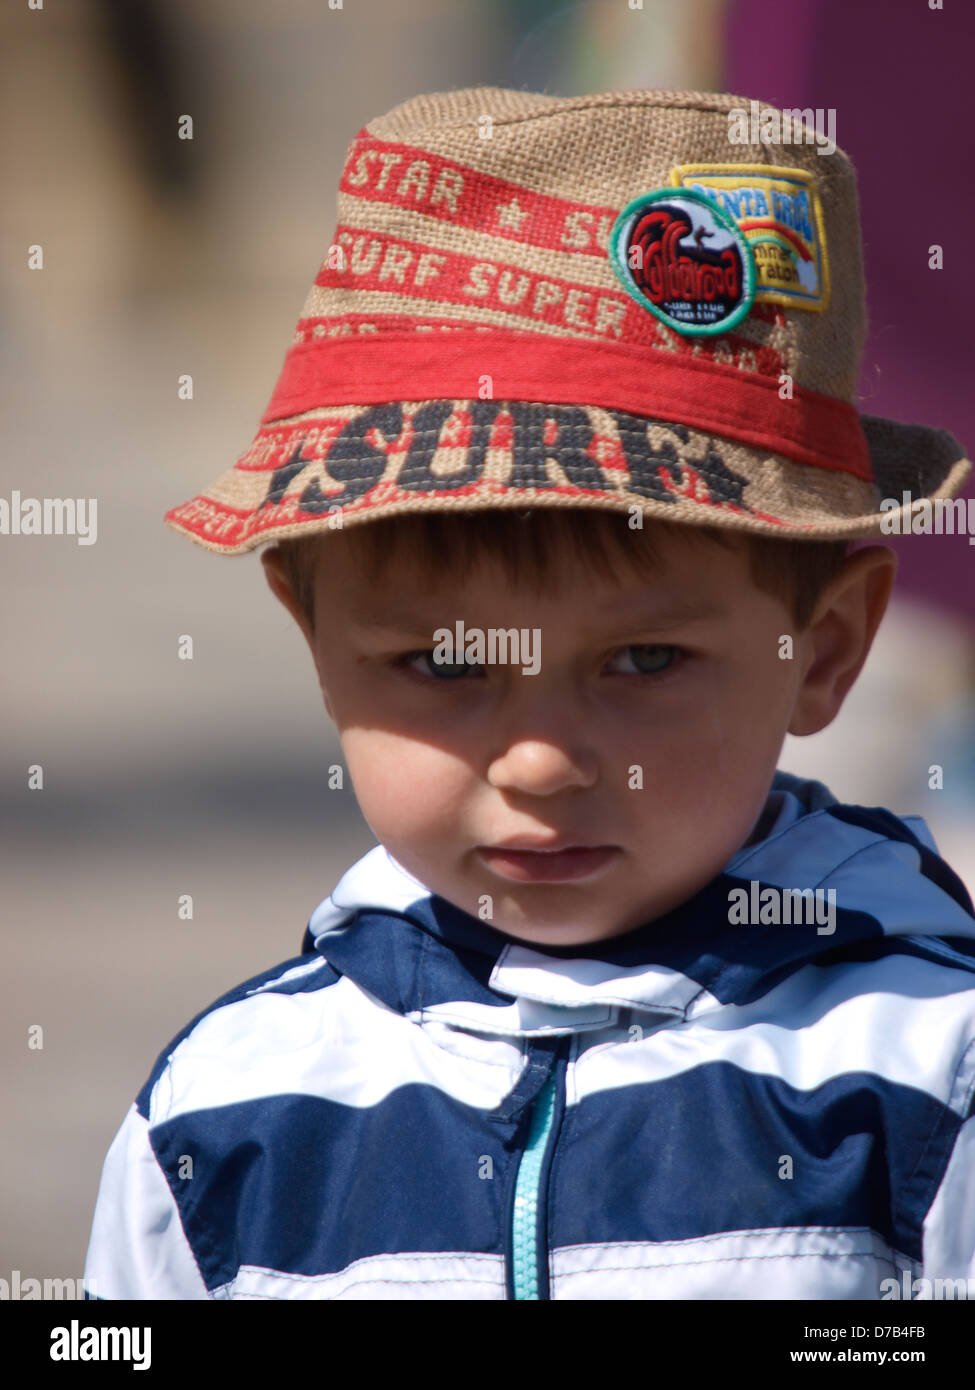 Toddler wearing a trilby type hat, UK 2013 Stock Photo